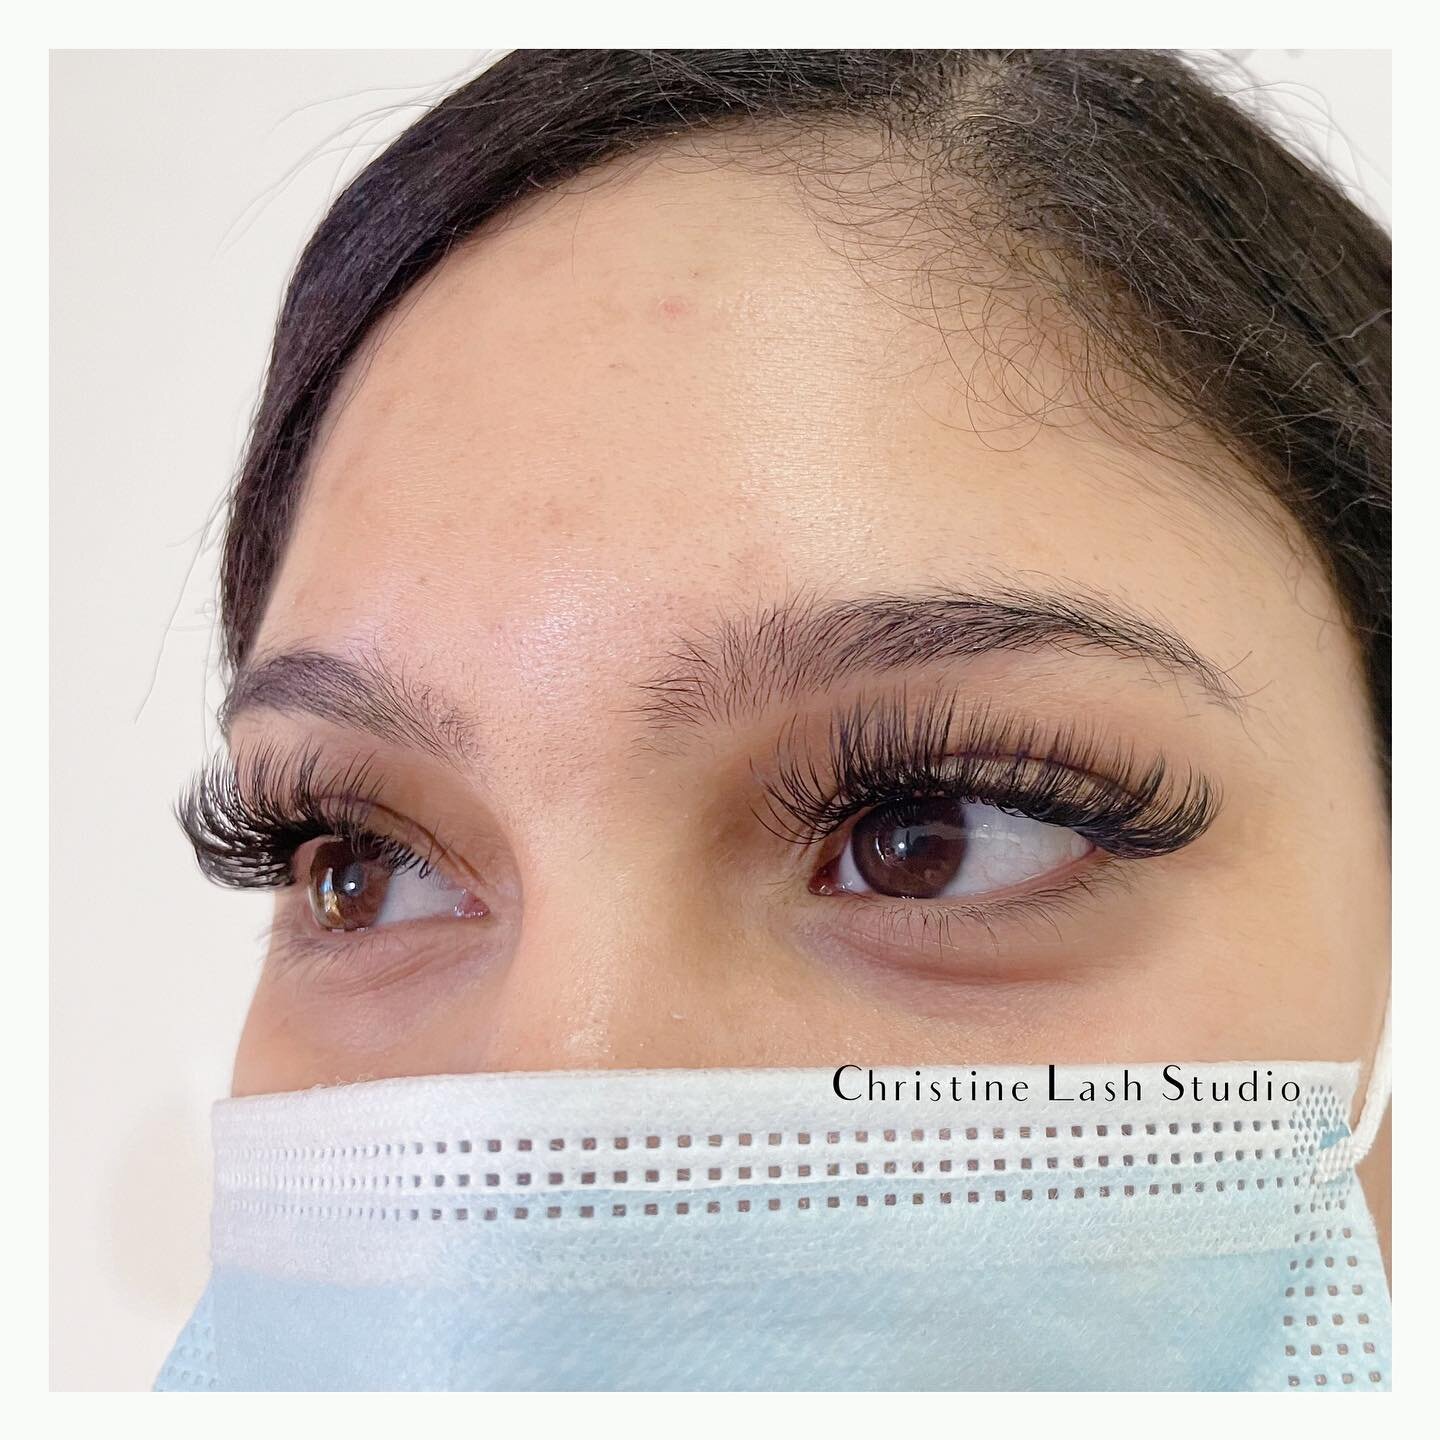 Can't get lashes like this with mascara! 🙊Luxury Volume Lashes pictured here on this beauty 💕

 #lashextensions #hybridlashes #luxuryvolume #lashesofinstagram #lashesnyc #nyclashextensions #beautysecret #beautygram #lashboss #lashartistnyc #nomasca